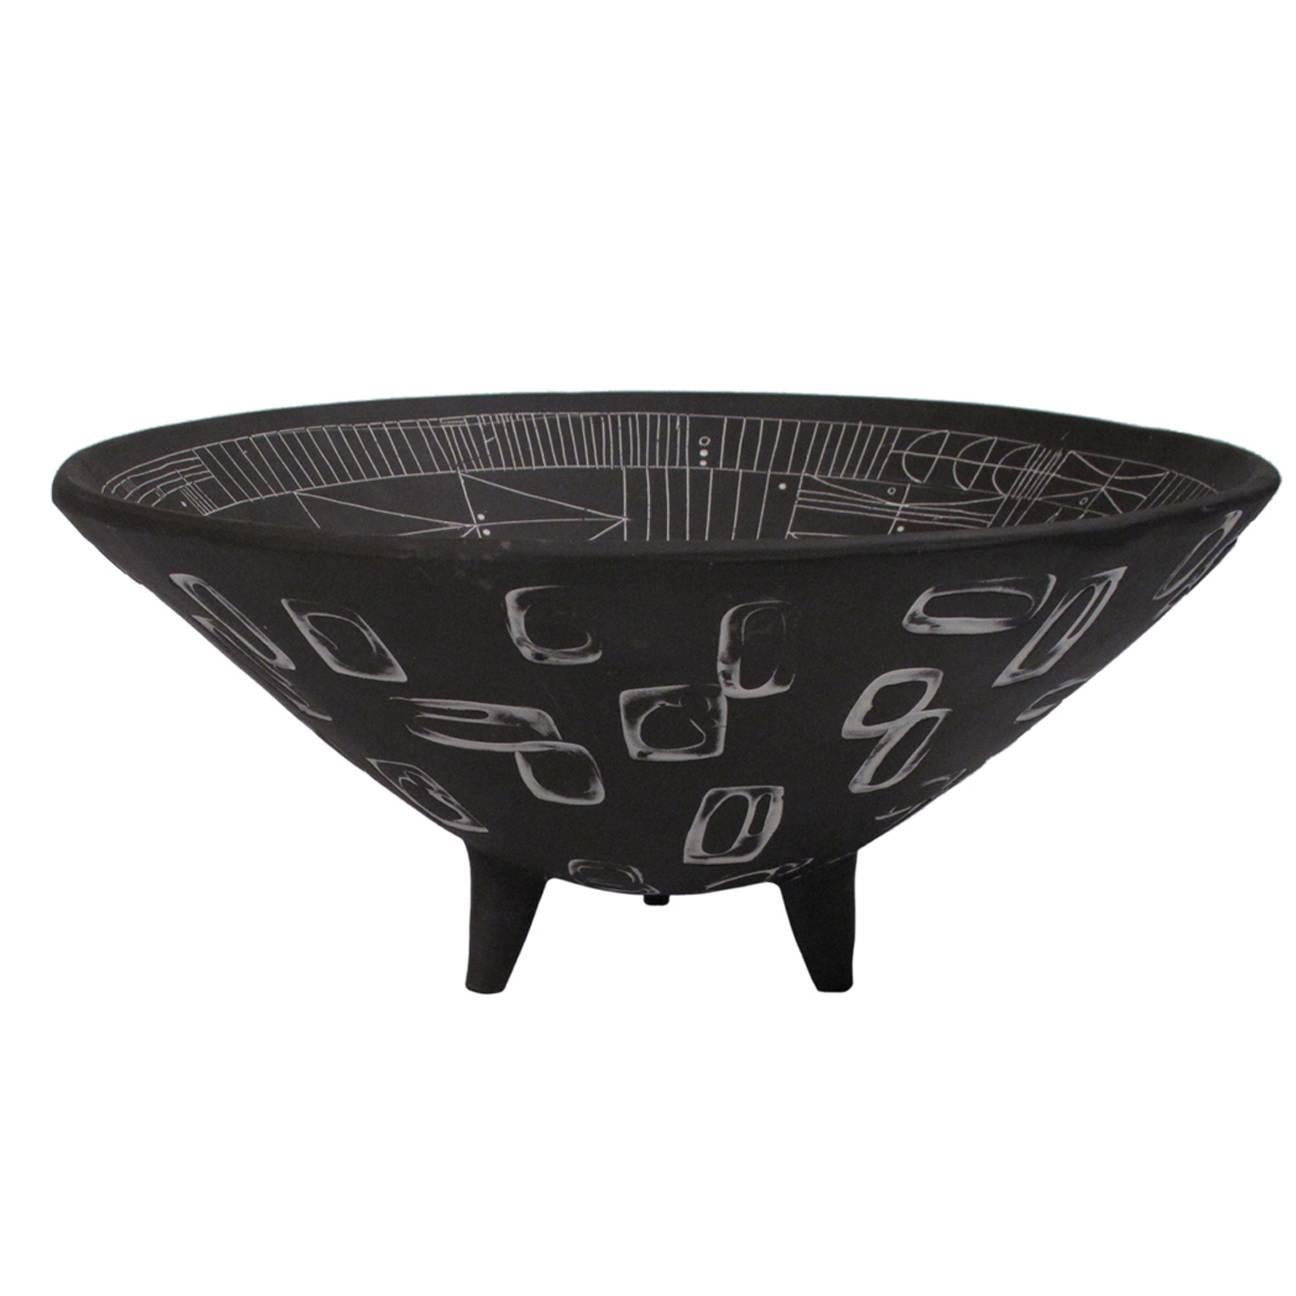 A large incised black and white “Scribe” ceramic bowl by LA artist Heather Rosenman. Individually carved, so no two are alike. Decorative purpose only. Signed by the artist.